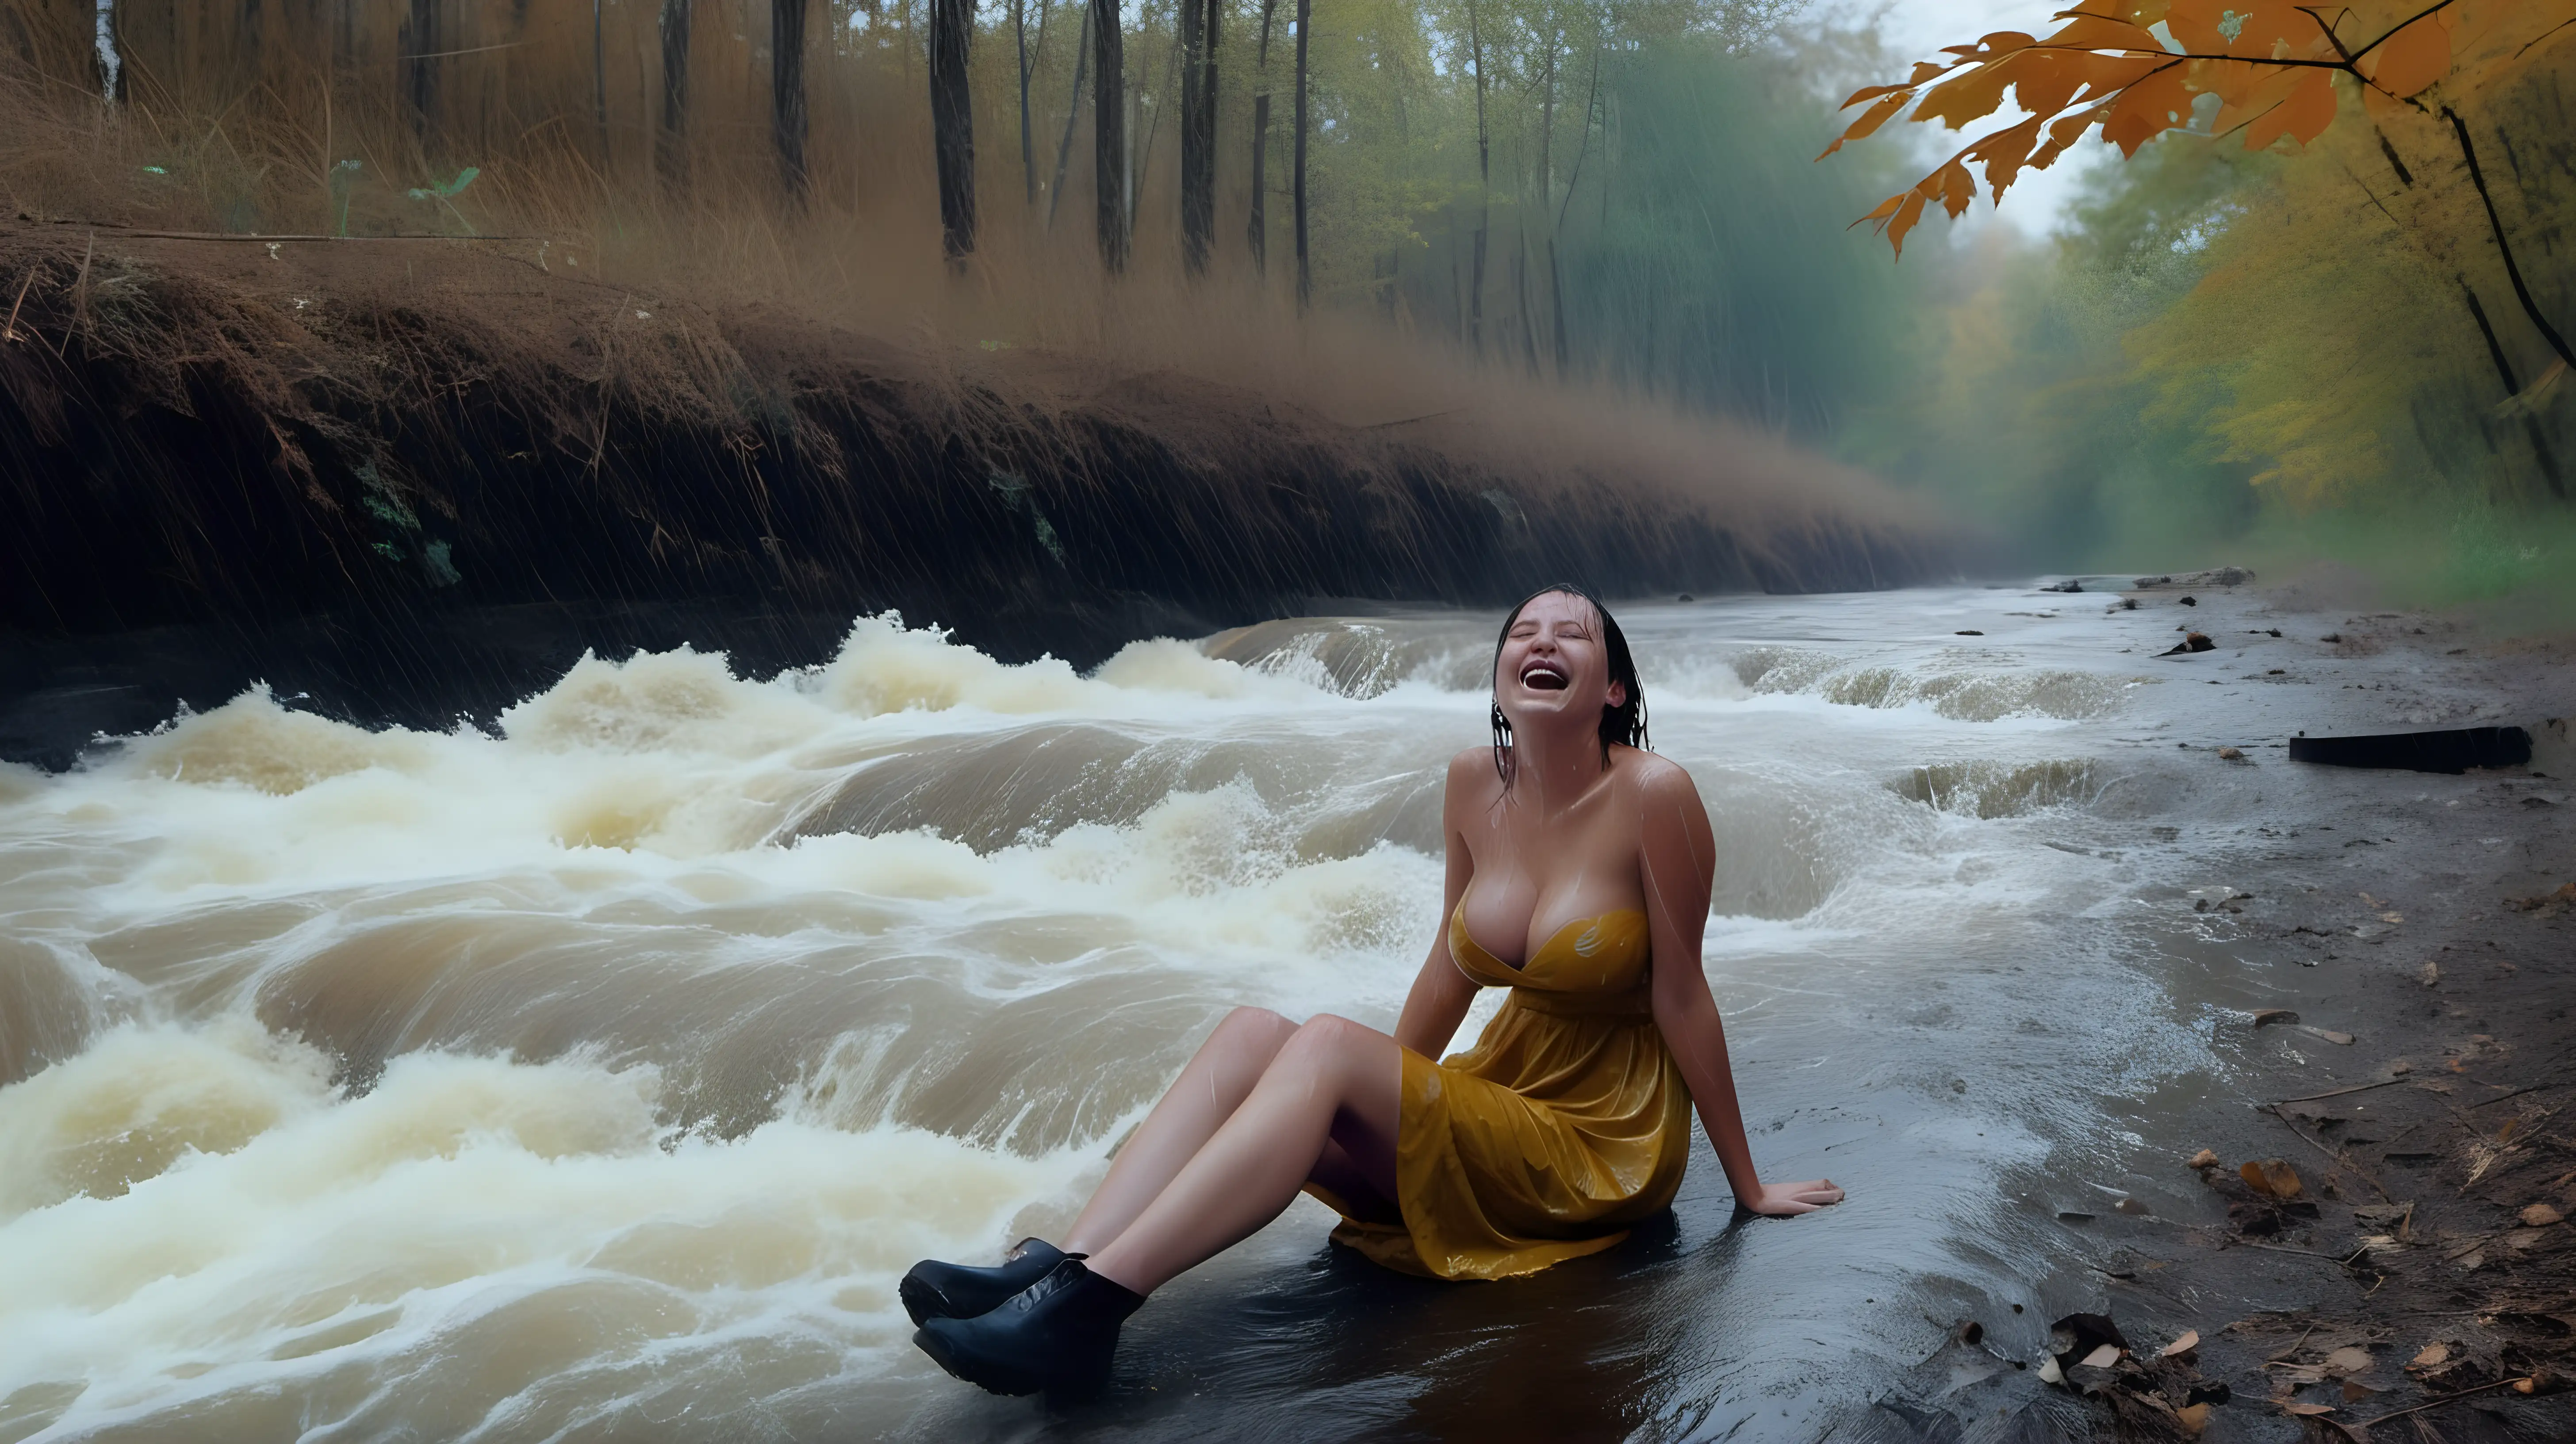 Enchanting Autumn Scene Joyful Young Woman Laughing in the Rain by Whitewater River